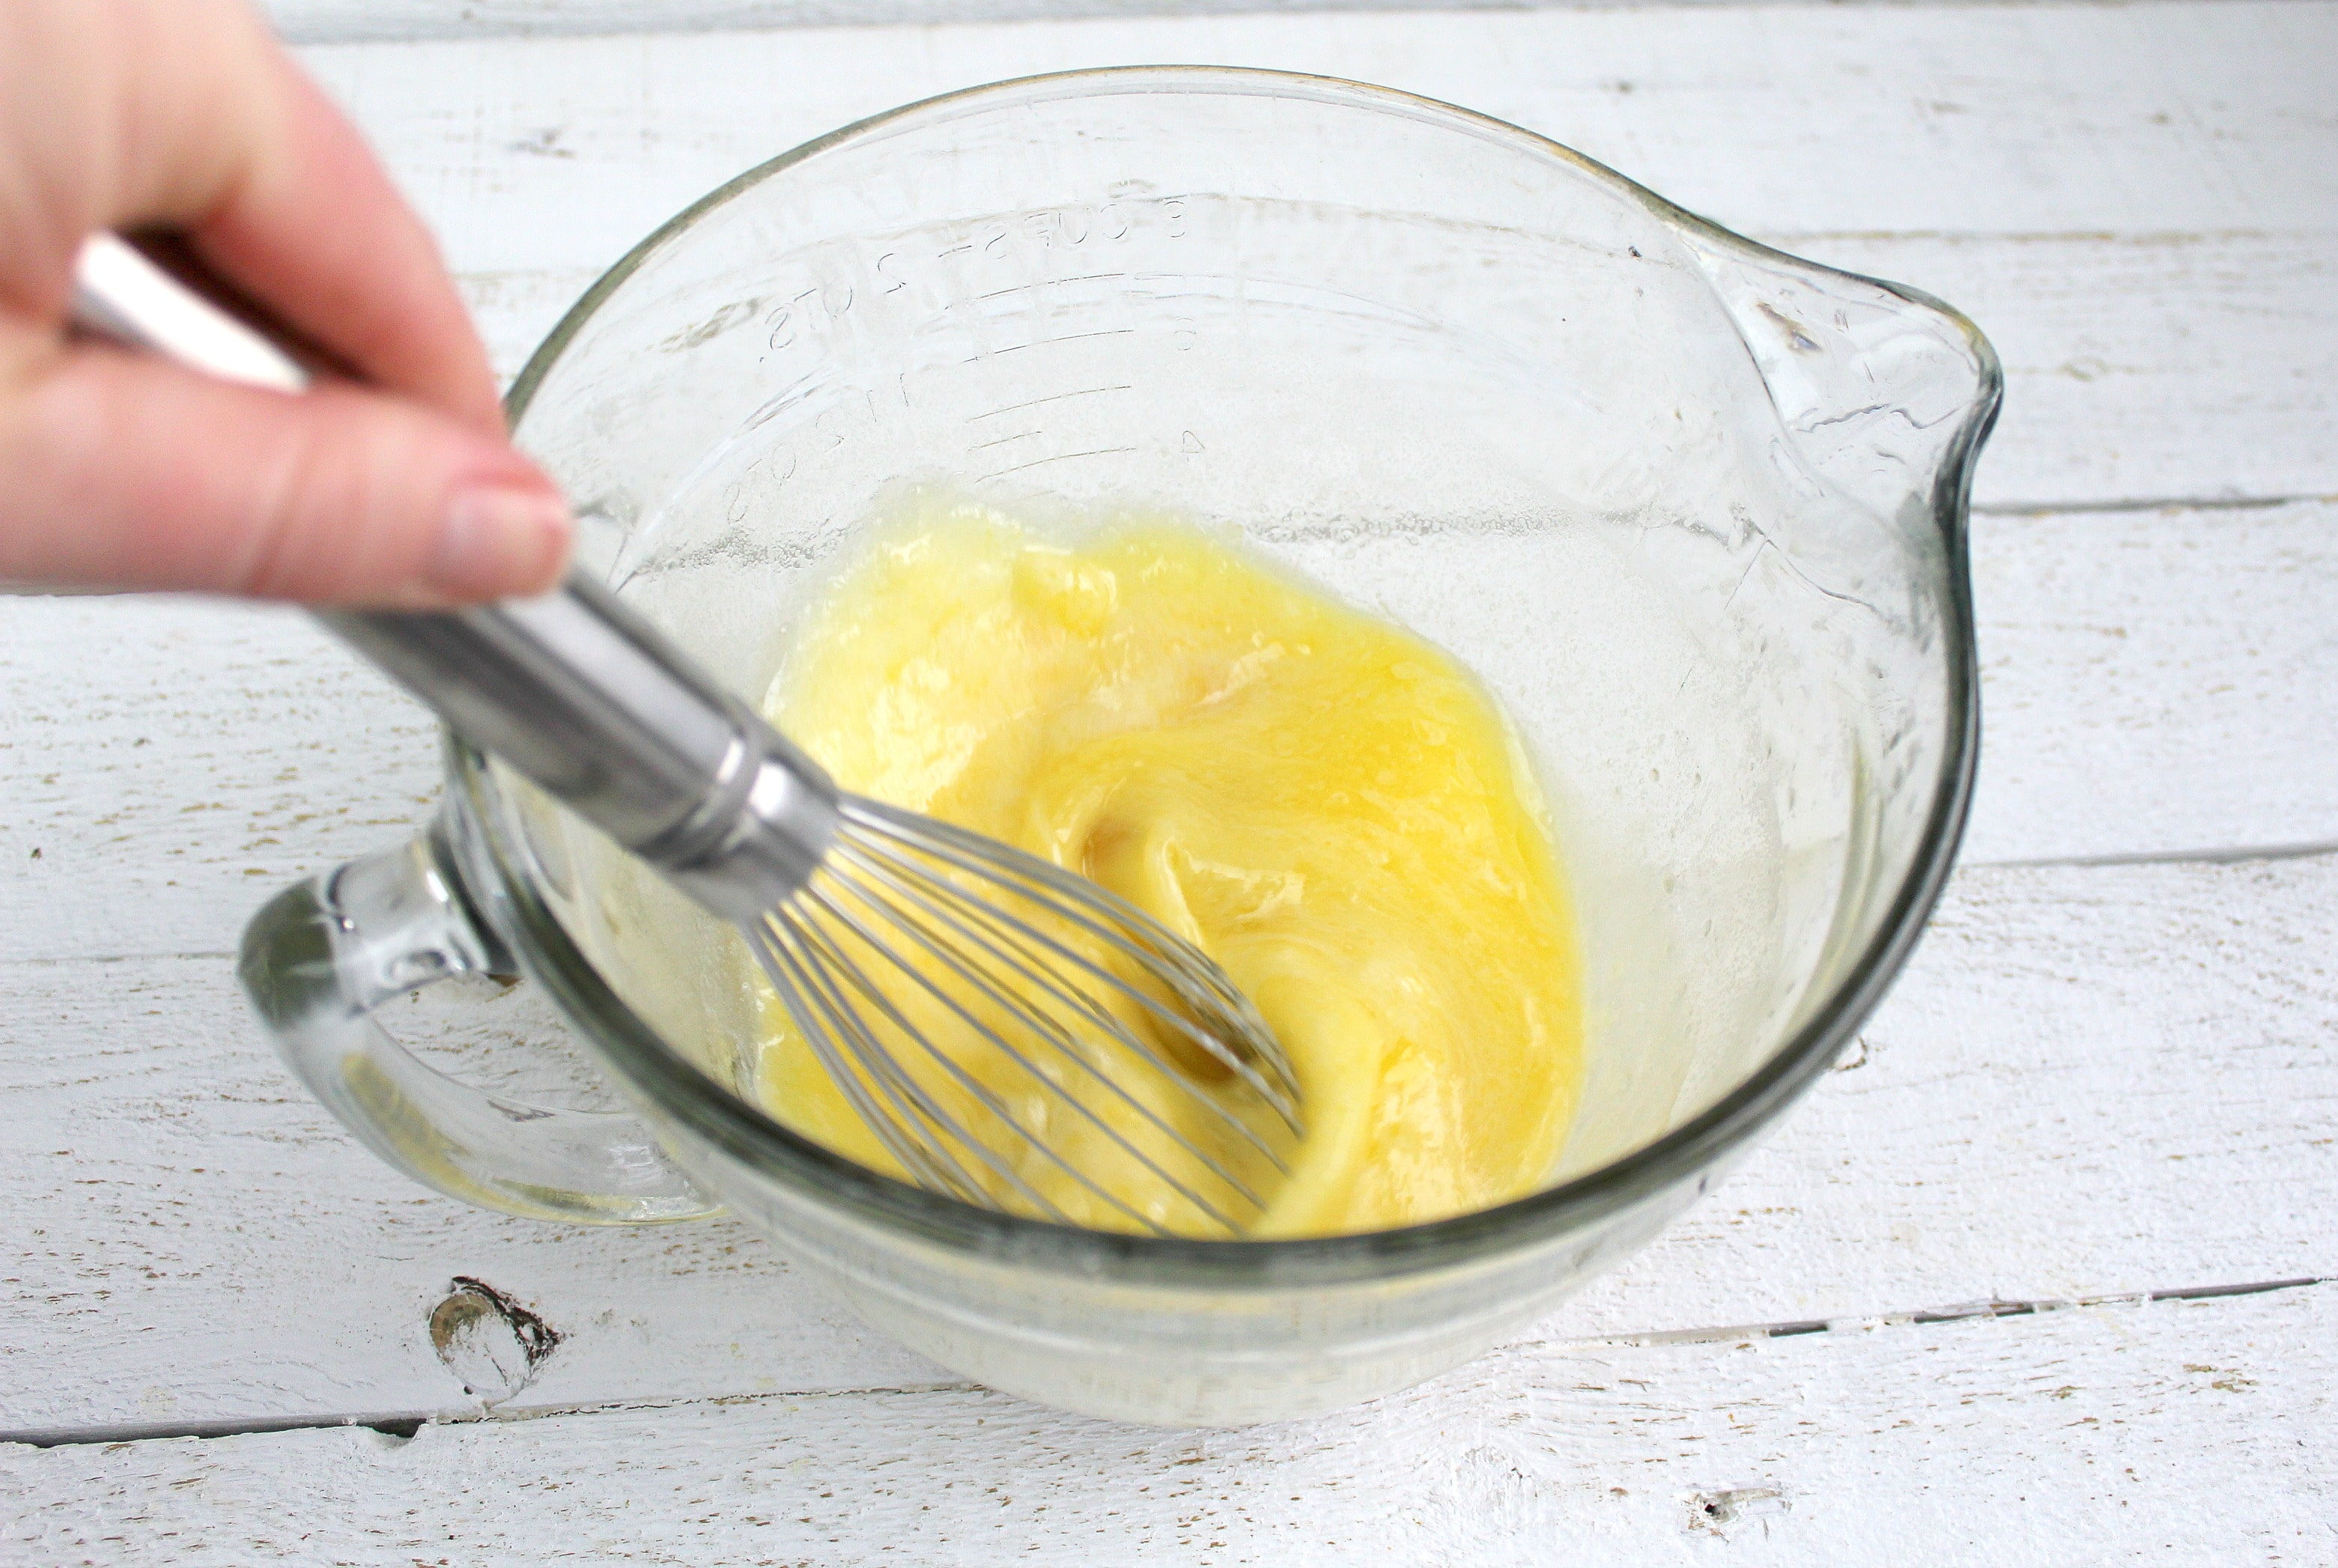 Whisk butter, milk and eggs together